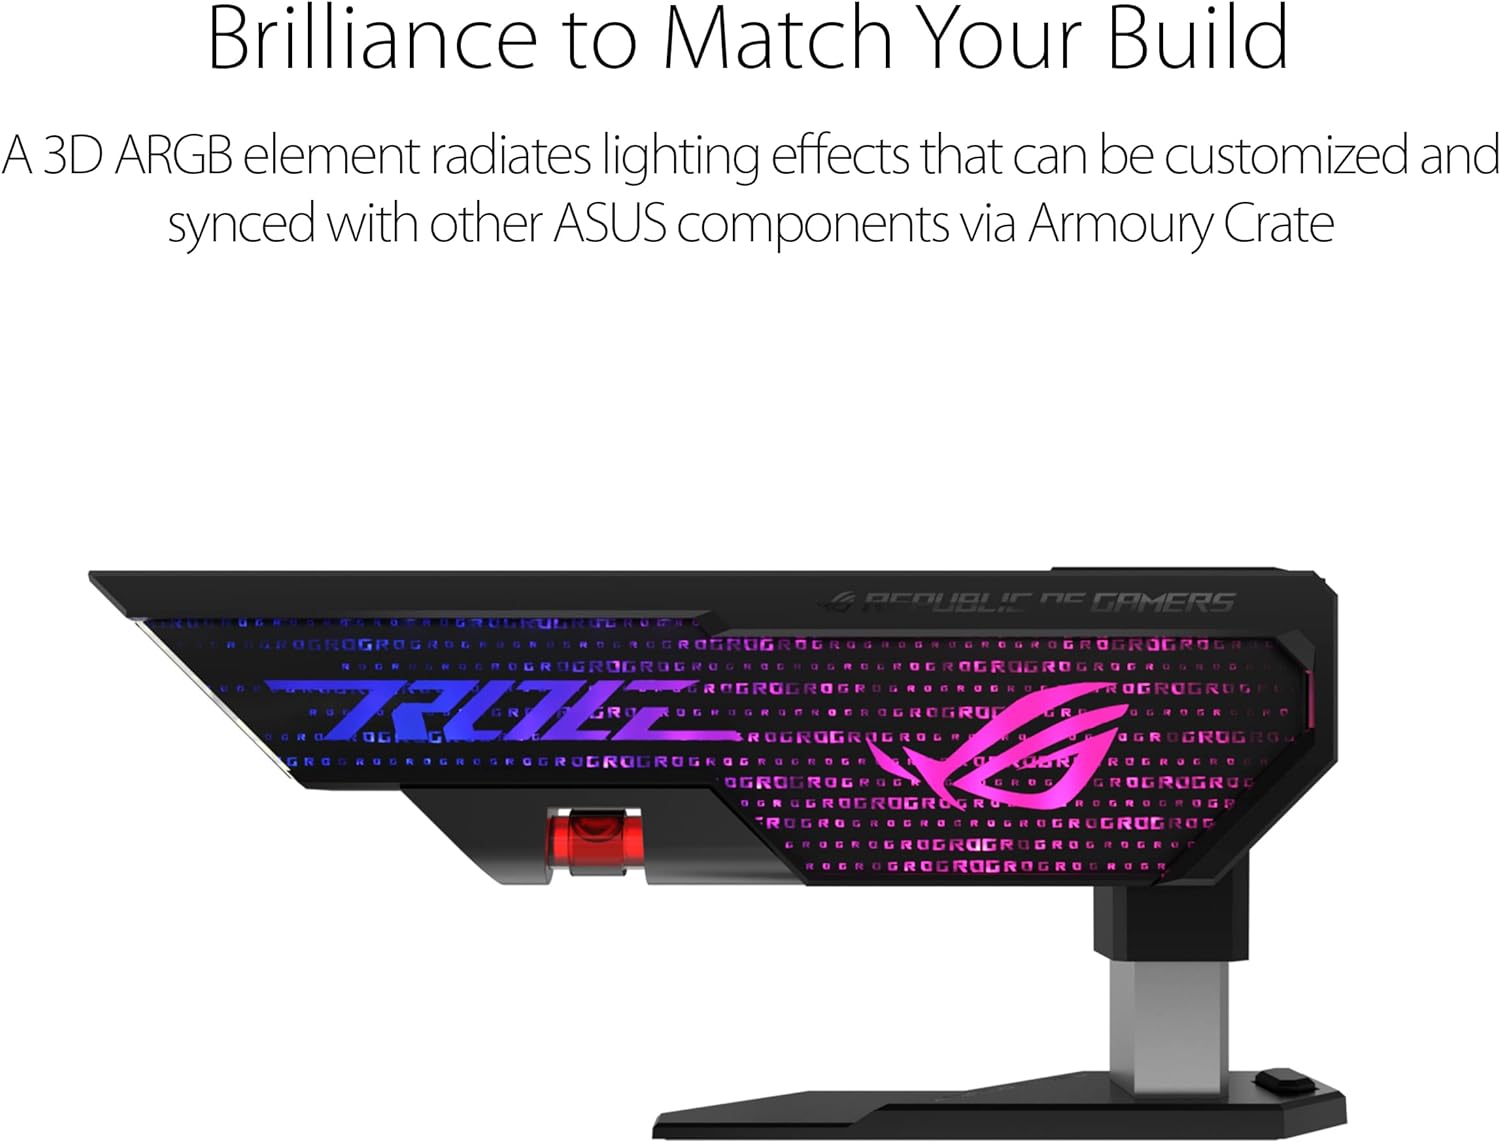 ASUS ROG Herculx Graphics Card Anti-Sag Holder Bracket (Solid Zinc Alloy Construction, Easy Toolless Installation, Included Spirit Level, Adjustable Height, Wide Compatibility, Aura Sync RGB)